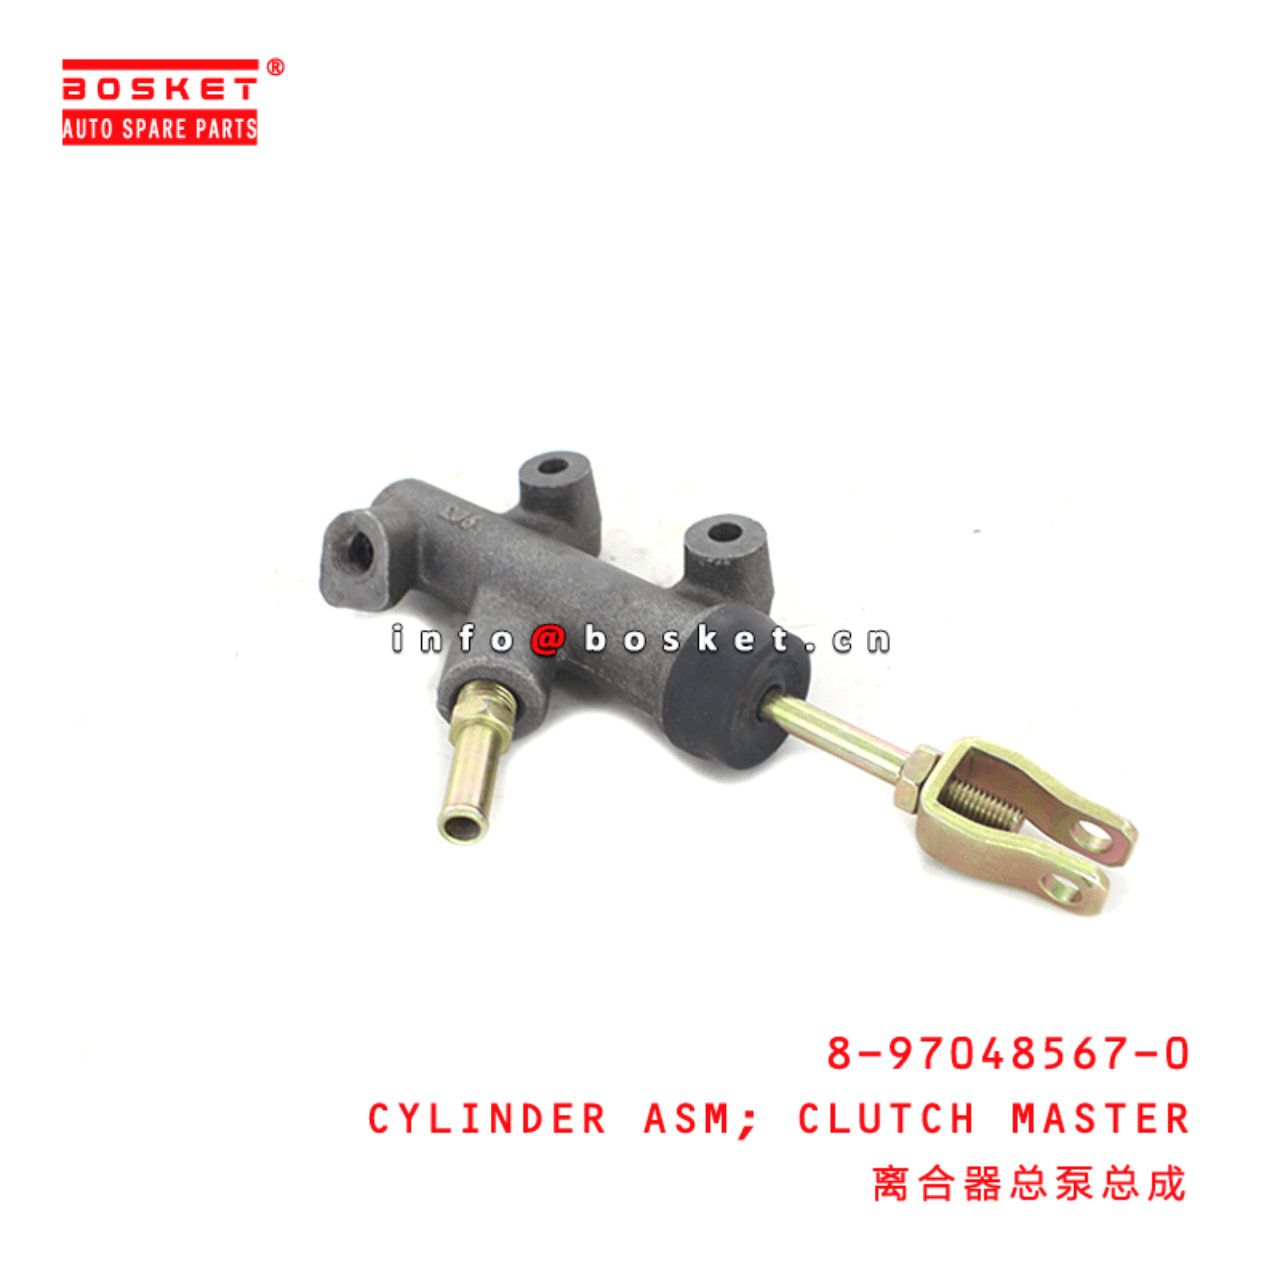  8-97048567-0 Clutch Master Cylinder Assembly 8970485670 Suitable for ISUZU WHR 4JB1